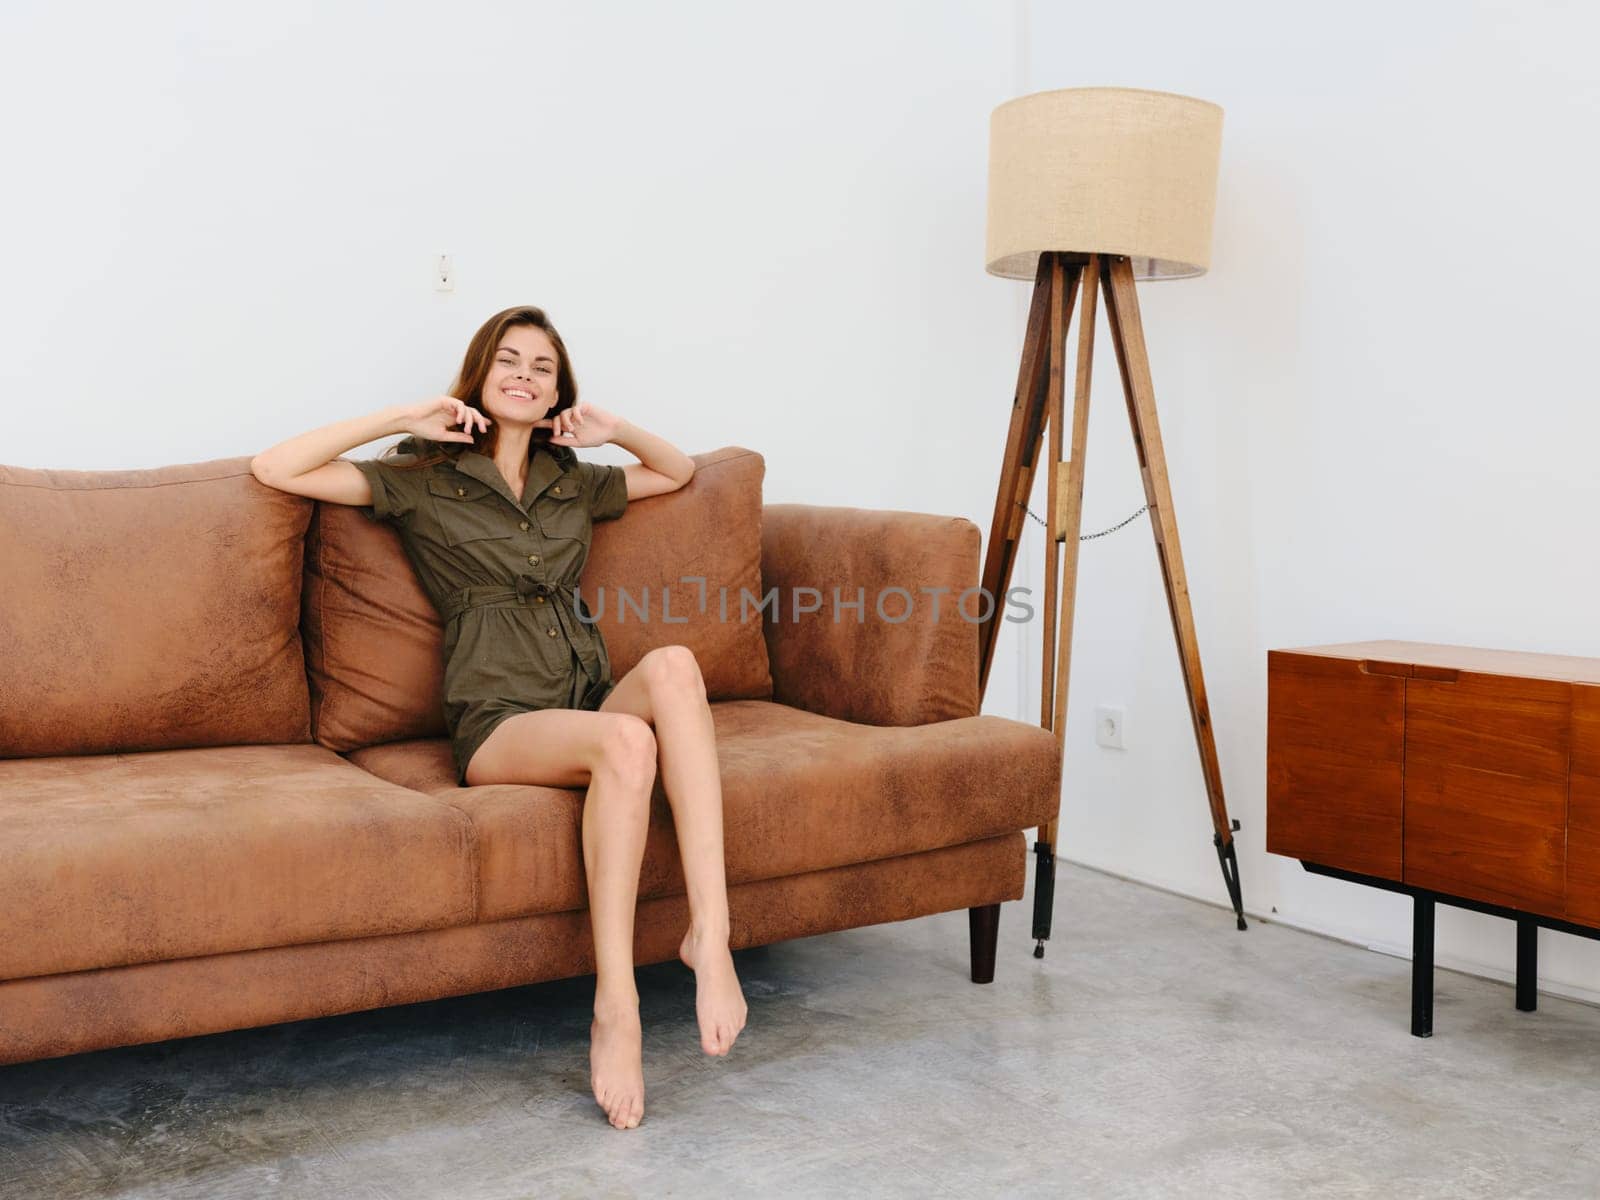 A person sitting in a living room. High quality photo